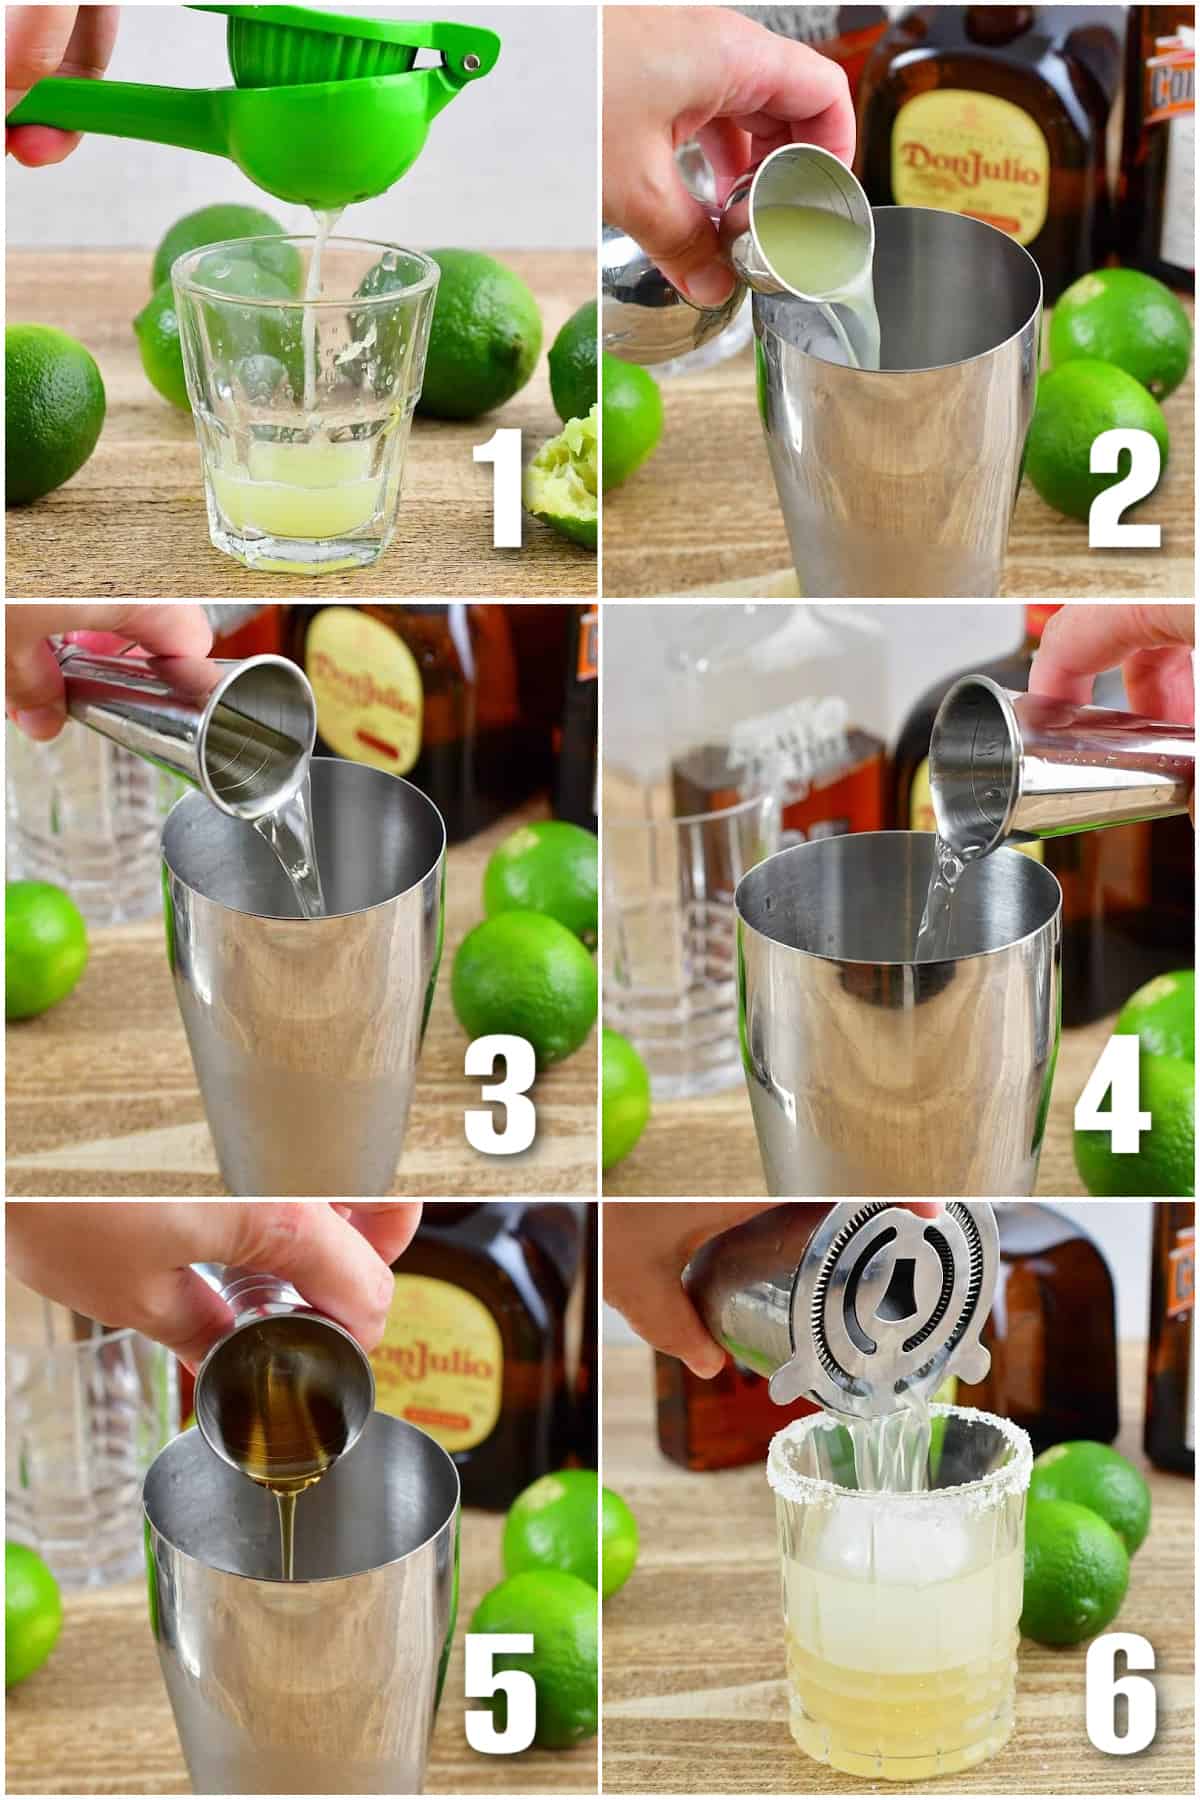 collage of six images of a process to make the margarita in a cocktail shaker.